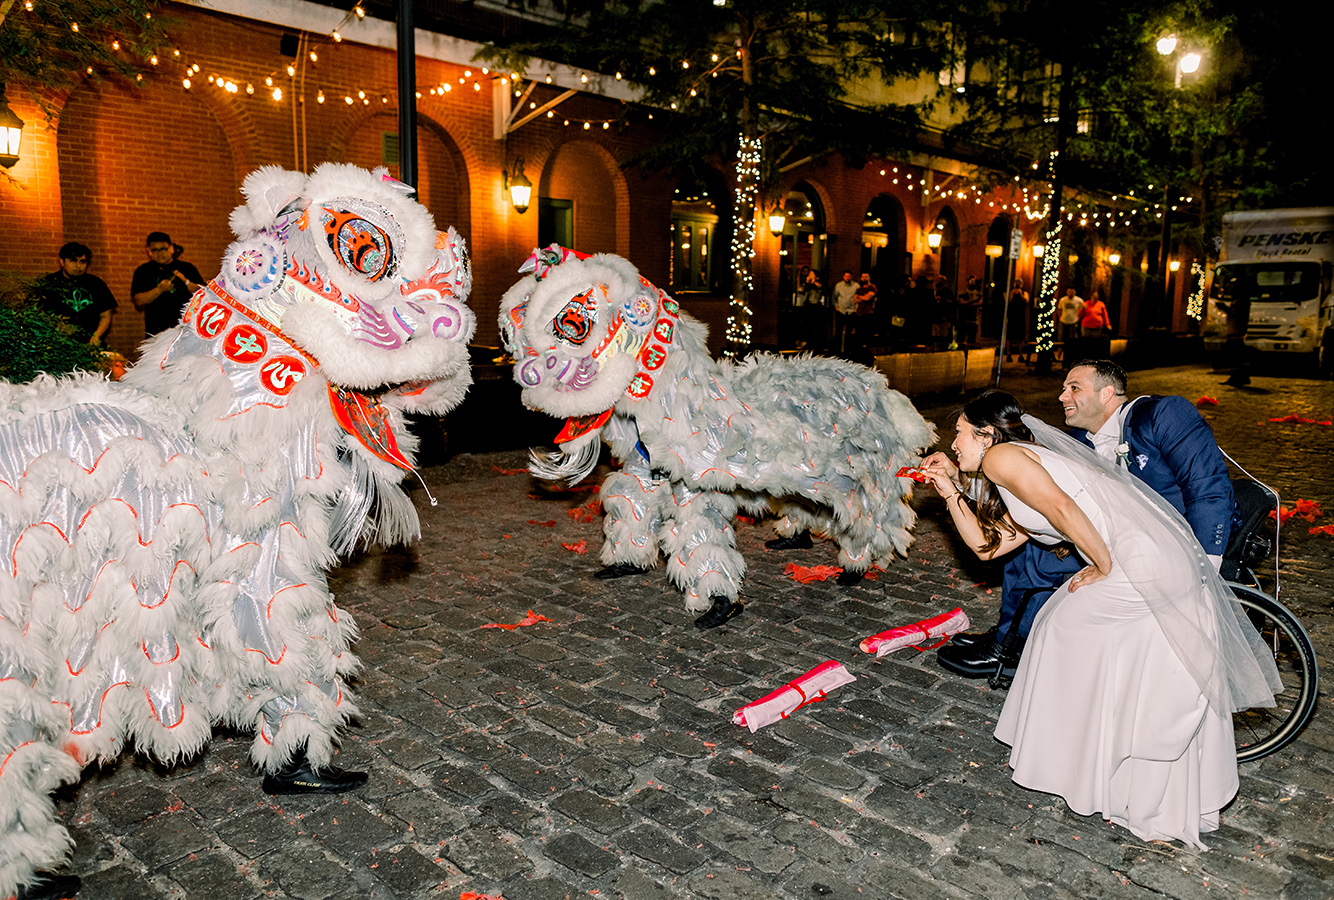 “We included a Vietnamese Dragon dancer at the end with firecrackers to bring good luck into our marriage,” shares Gina.